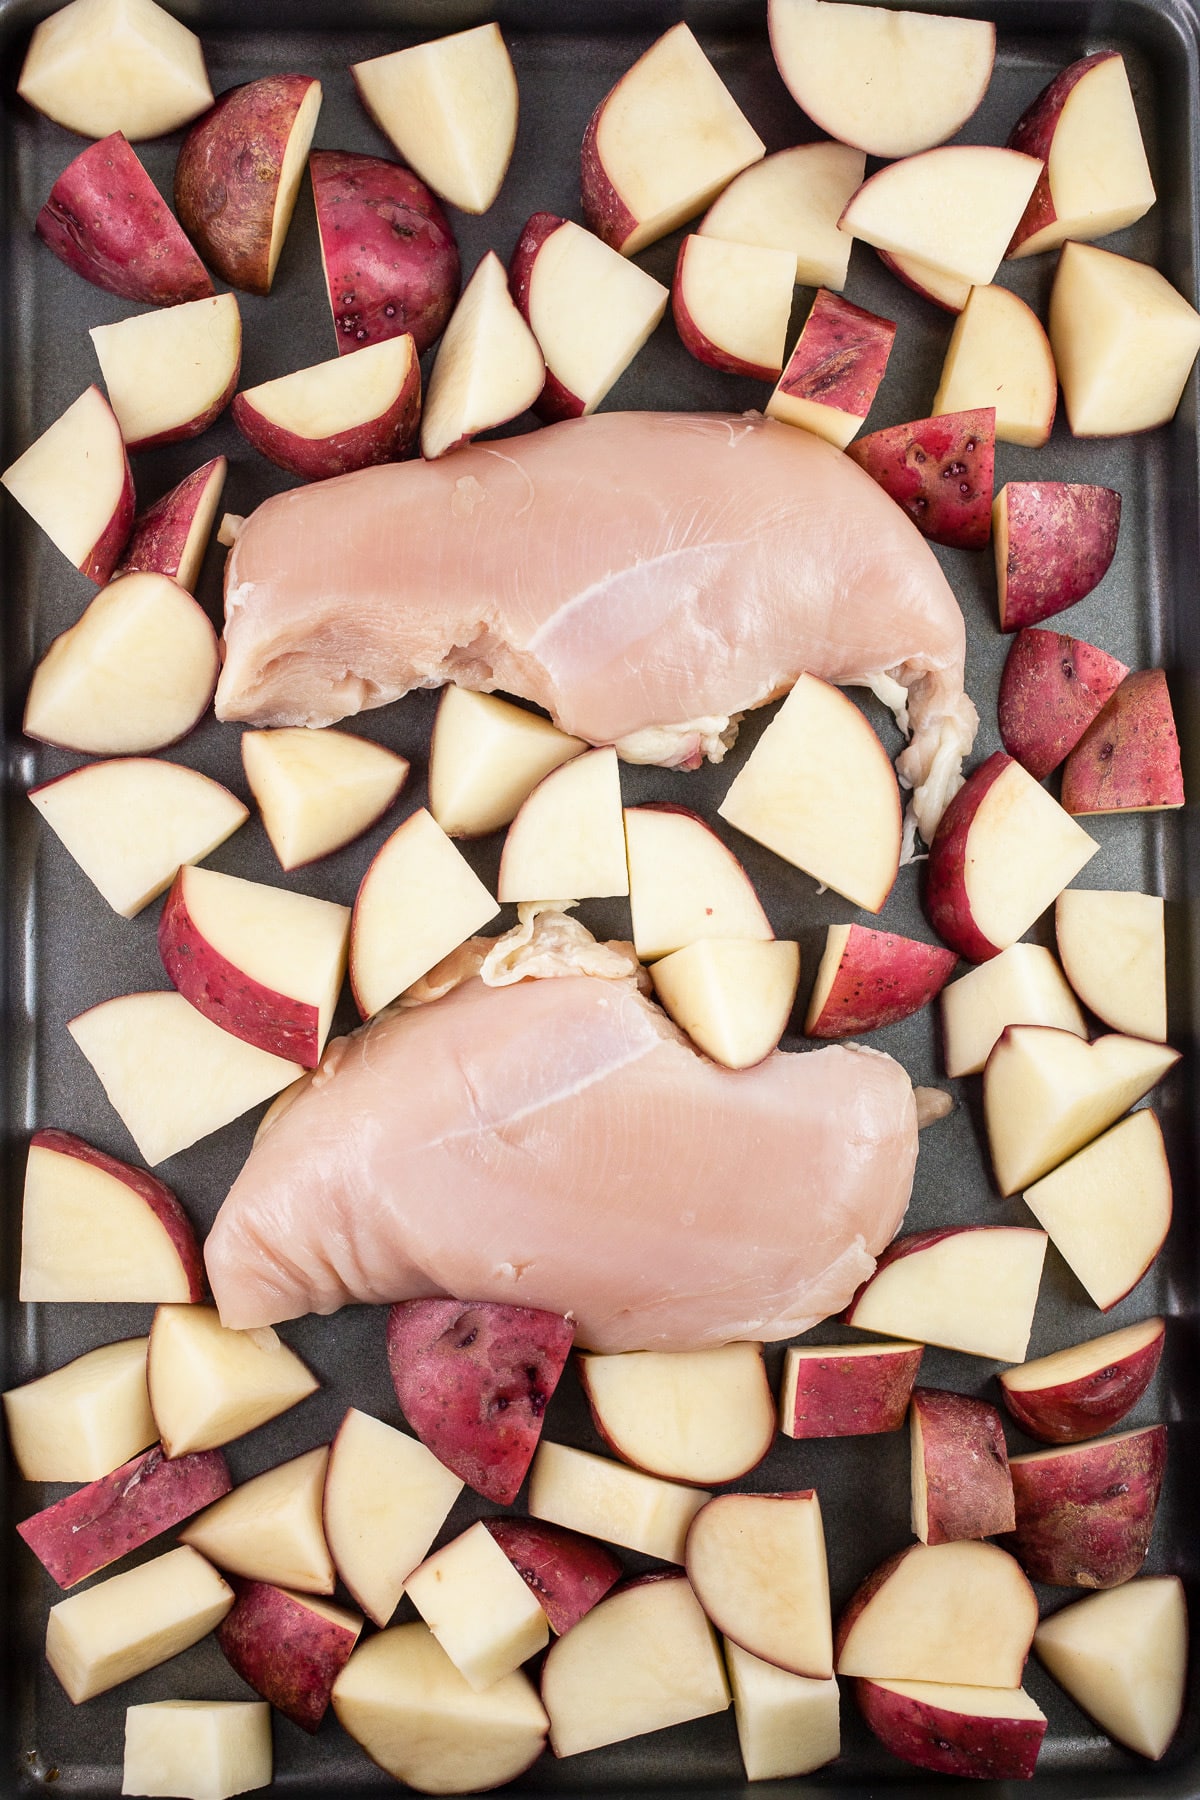 Uncooked chicken breasts and diced red potatoes on baking sheet.